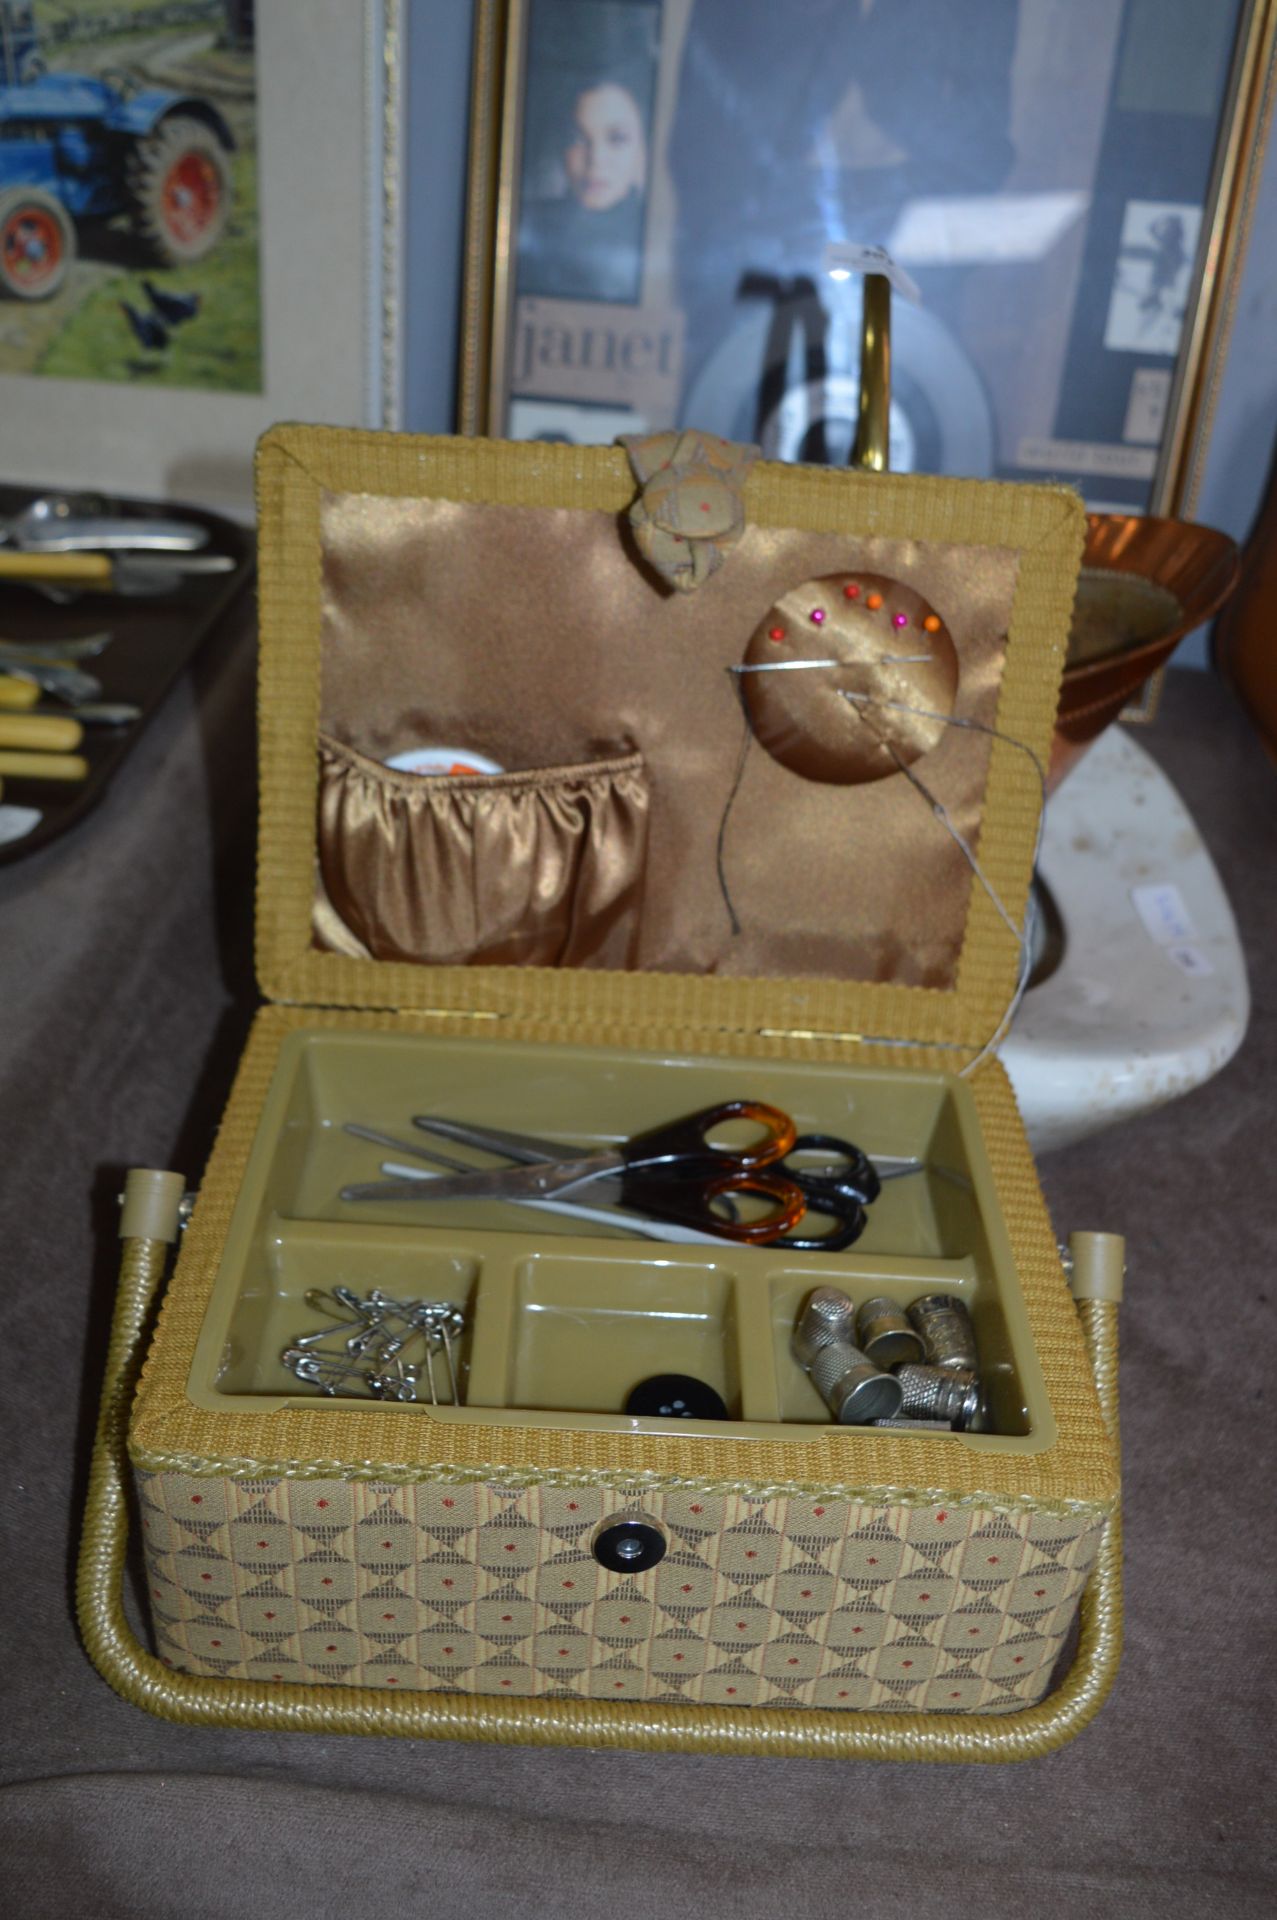 Sewing Box and Contents